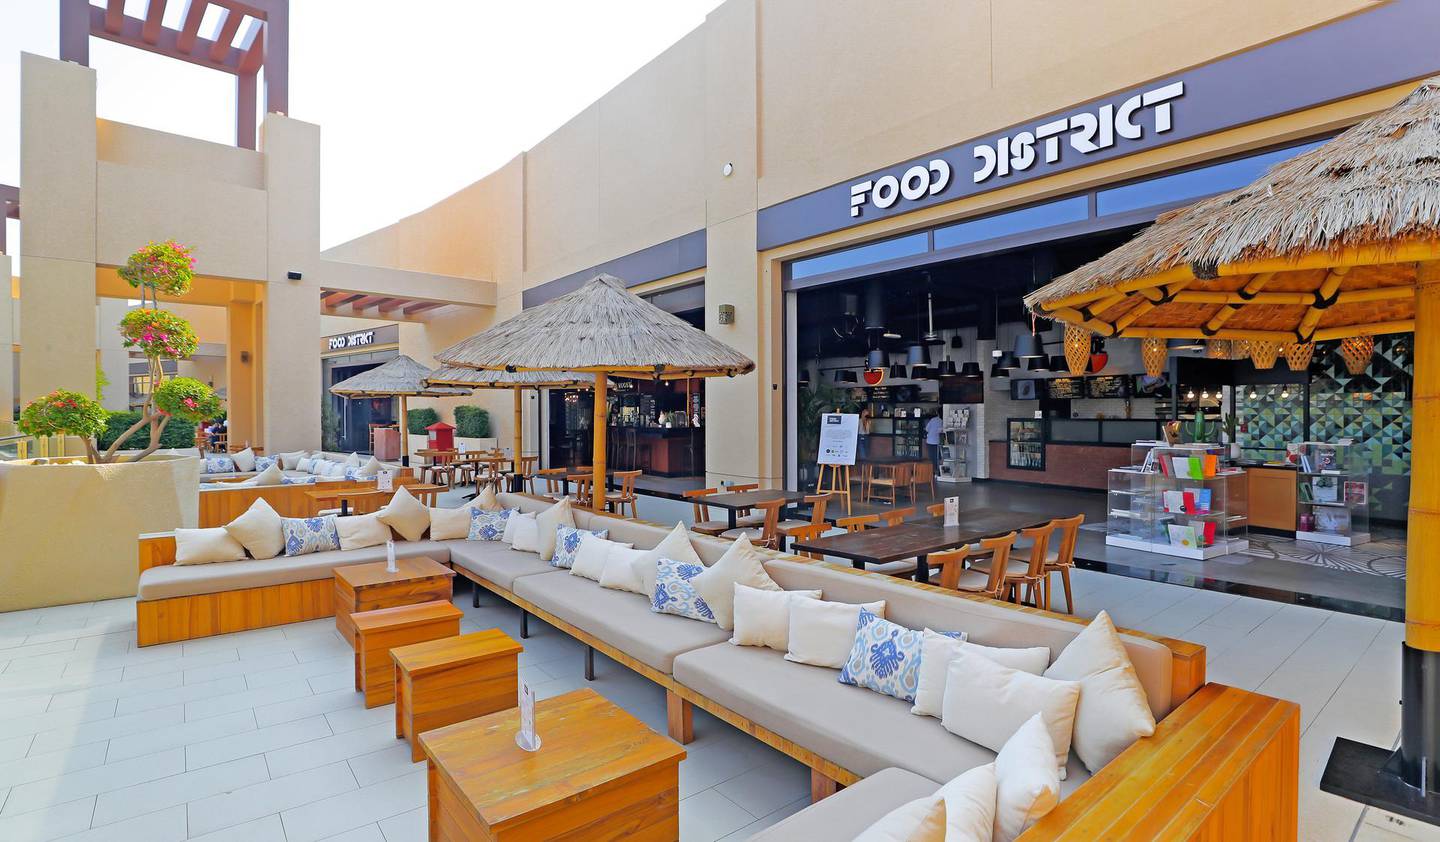 All the vendors at Food District at The Pointe, Palm Jumeirah, are home-grown